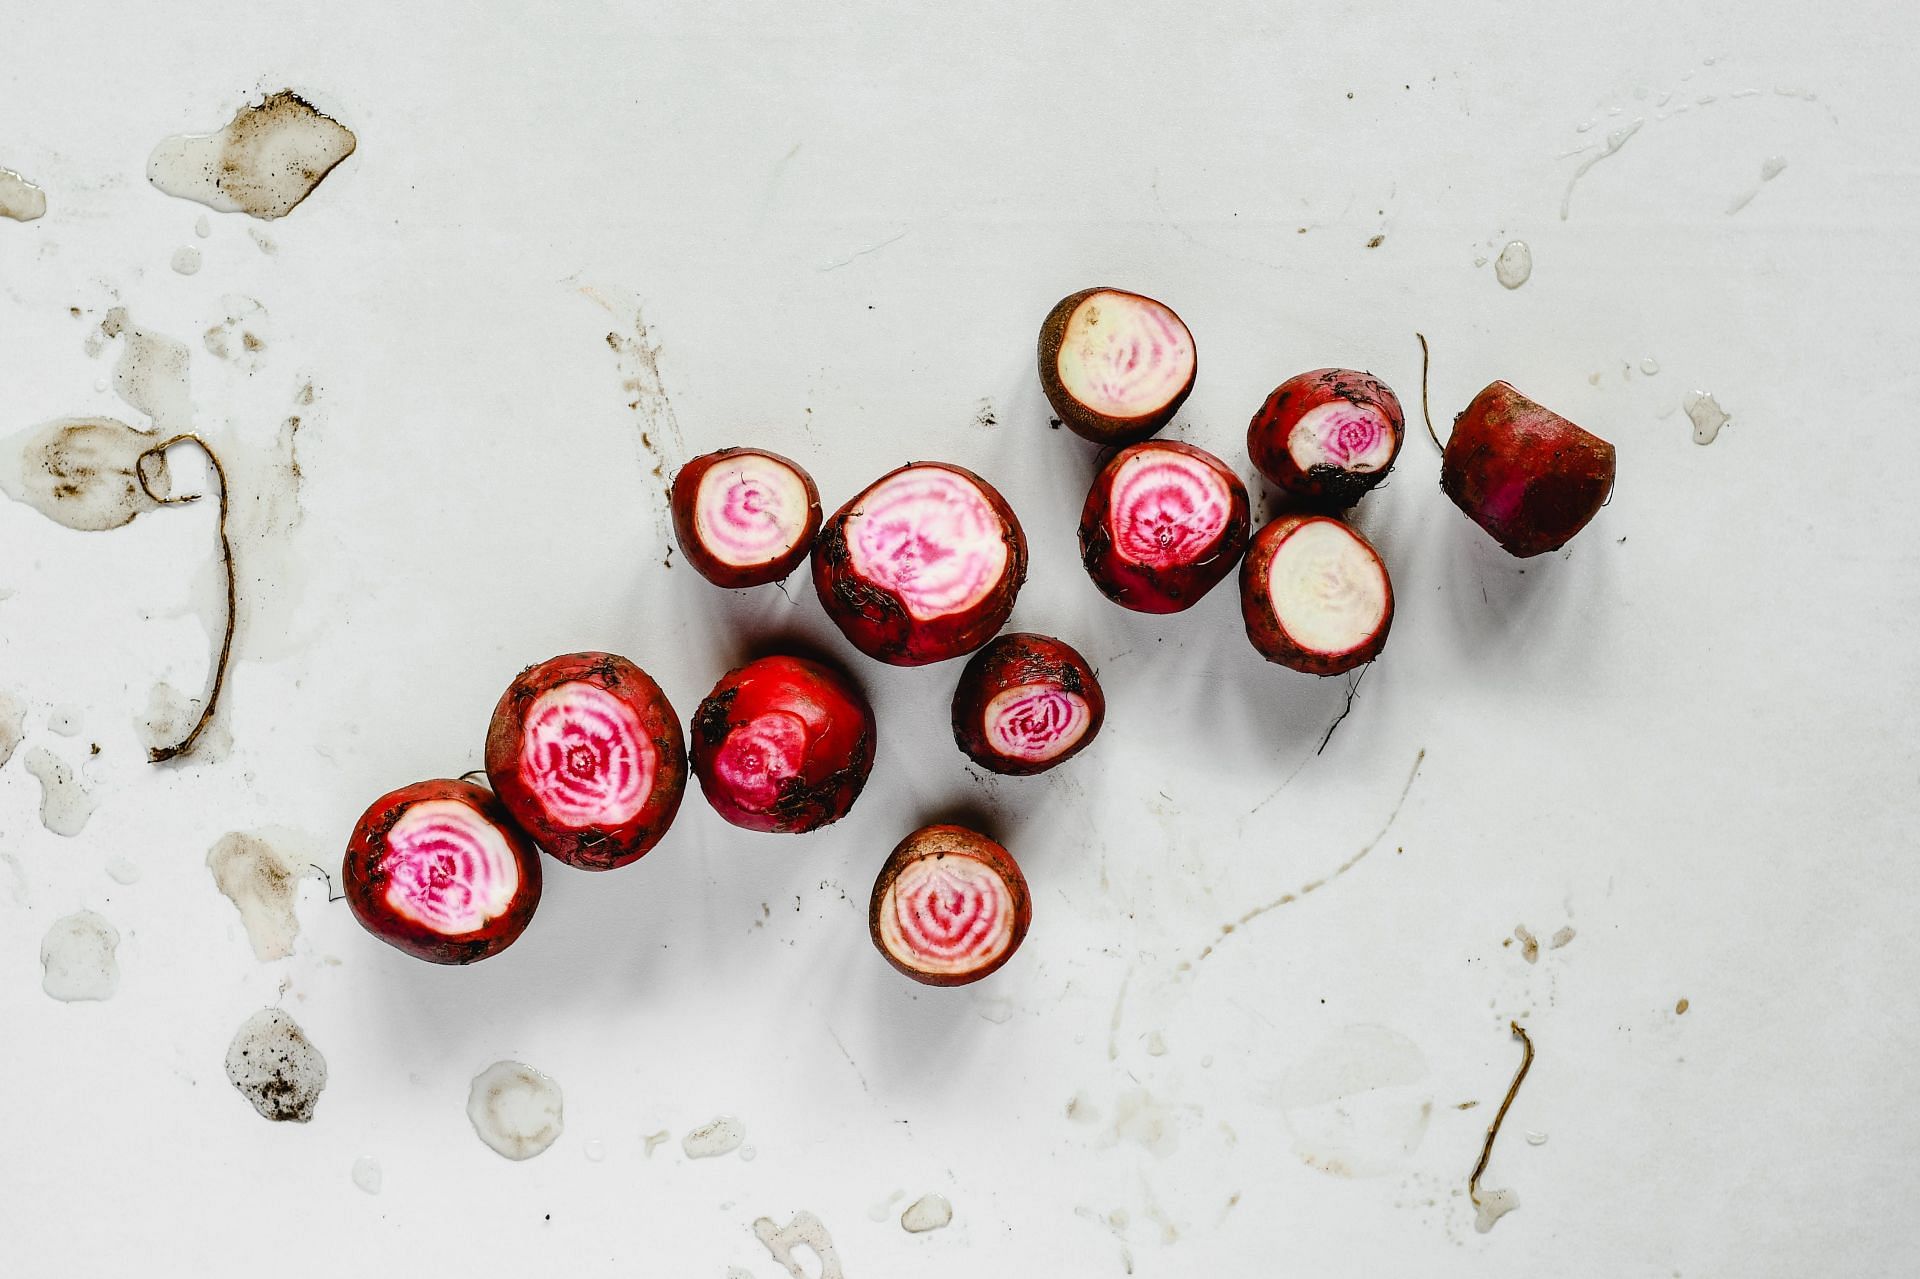 Beets as one of the worst vegetables for weight loss( Image sourced via Pexels / Photo by bronzini)